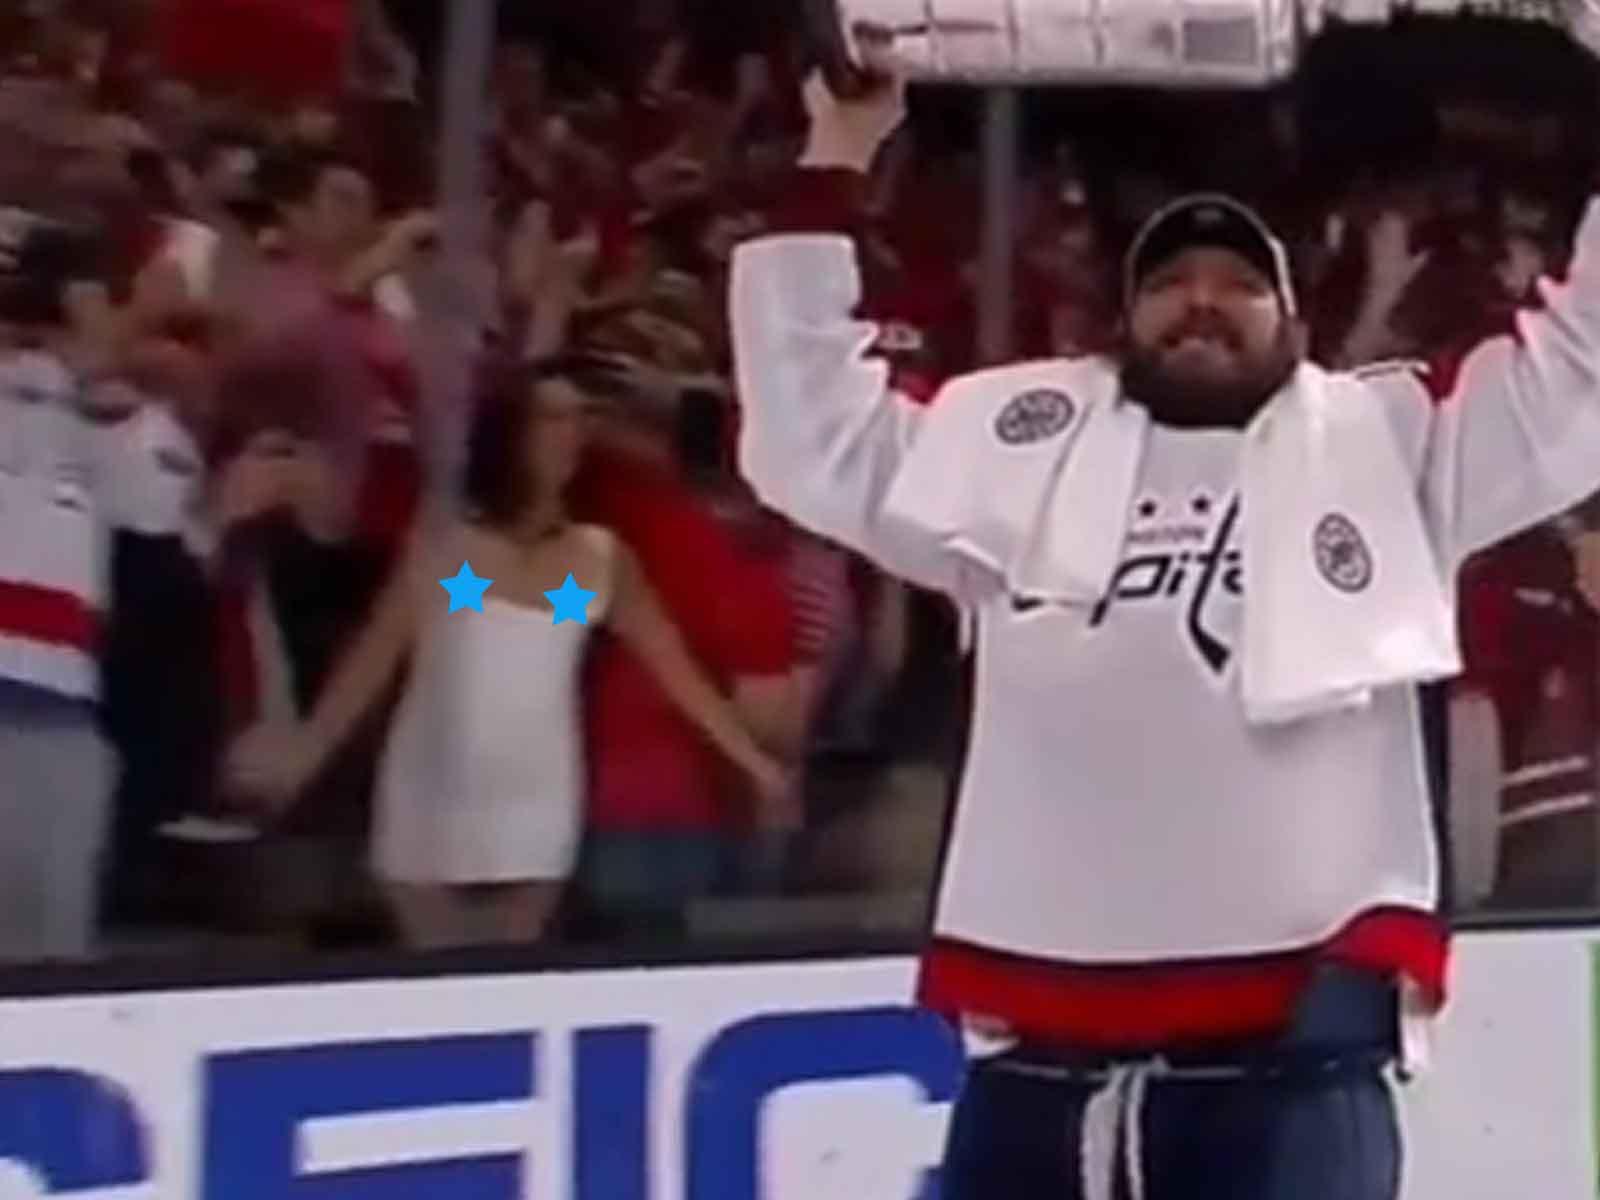 Stanley Cup Flasher Puts ‘Em On the Glass During Alex Ovechkin’s Victory Skate